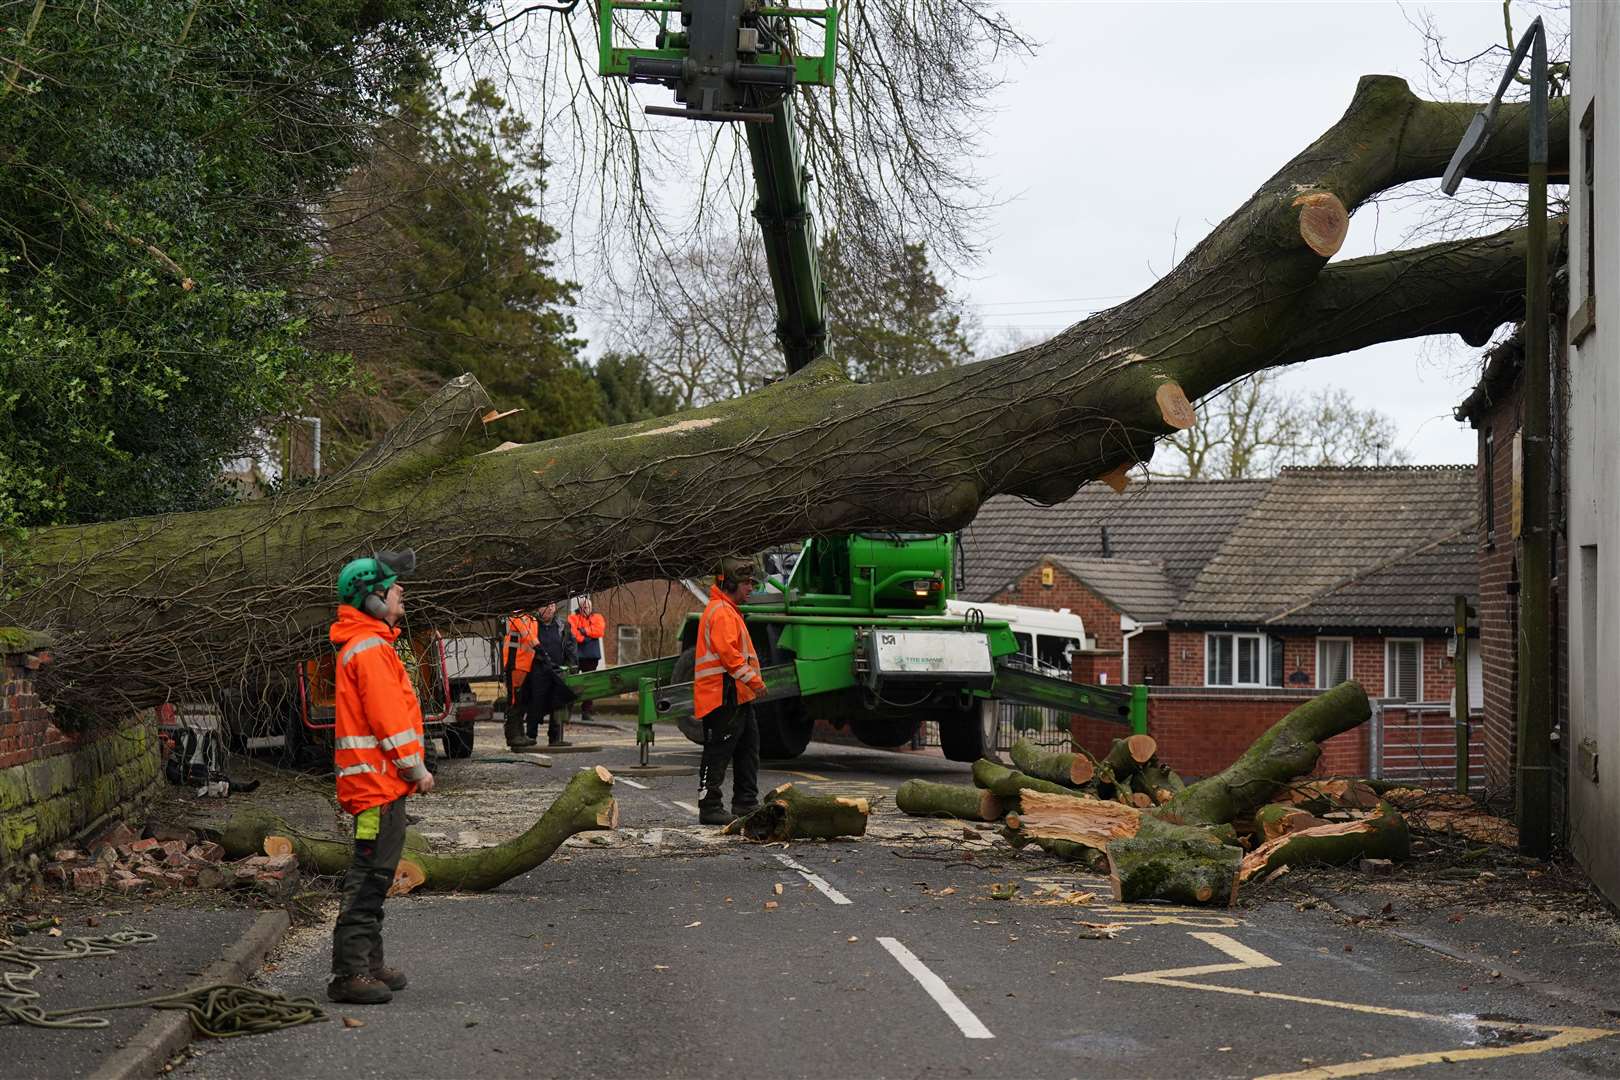 Workmen remove a fallen tree that has damaged the roof of a house in the village of Stanley in Derbyshire (Jacob King/PA)